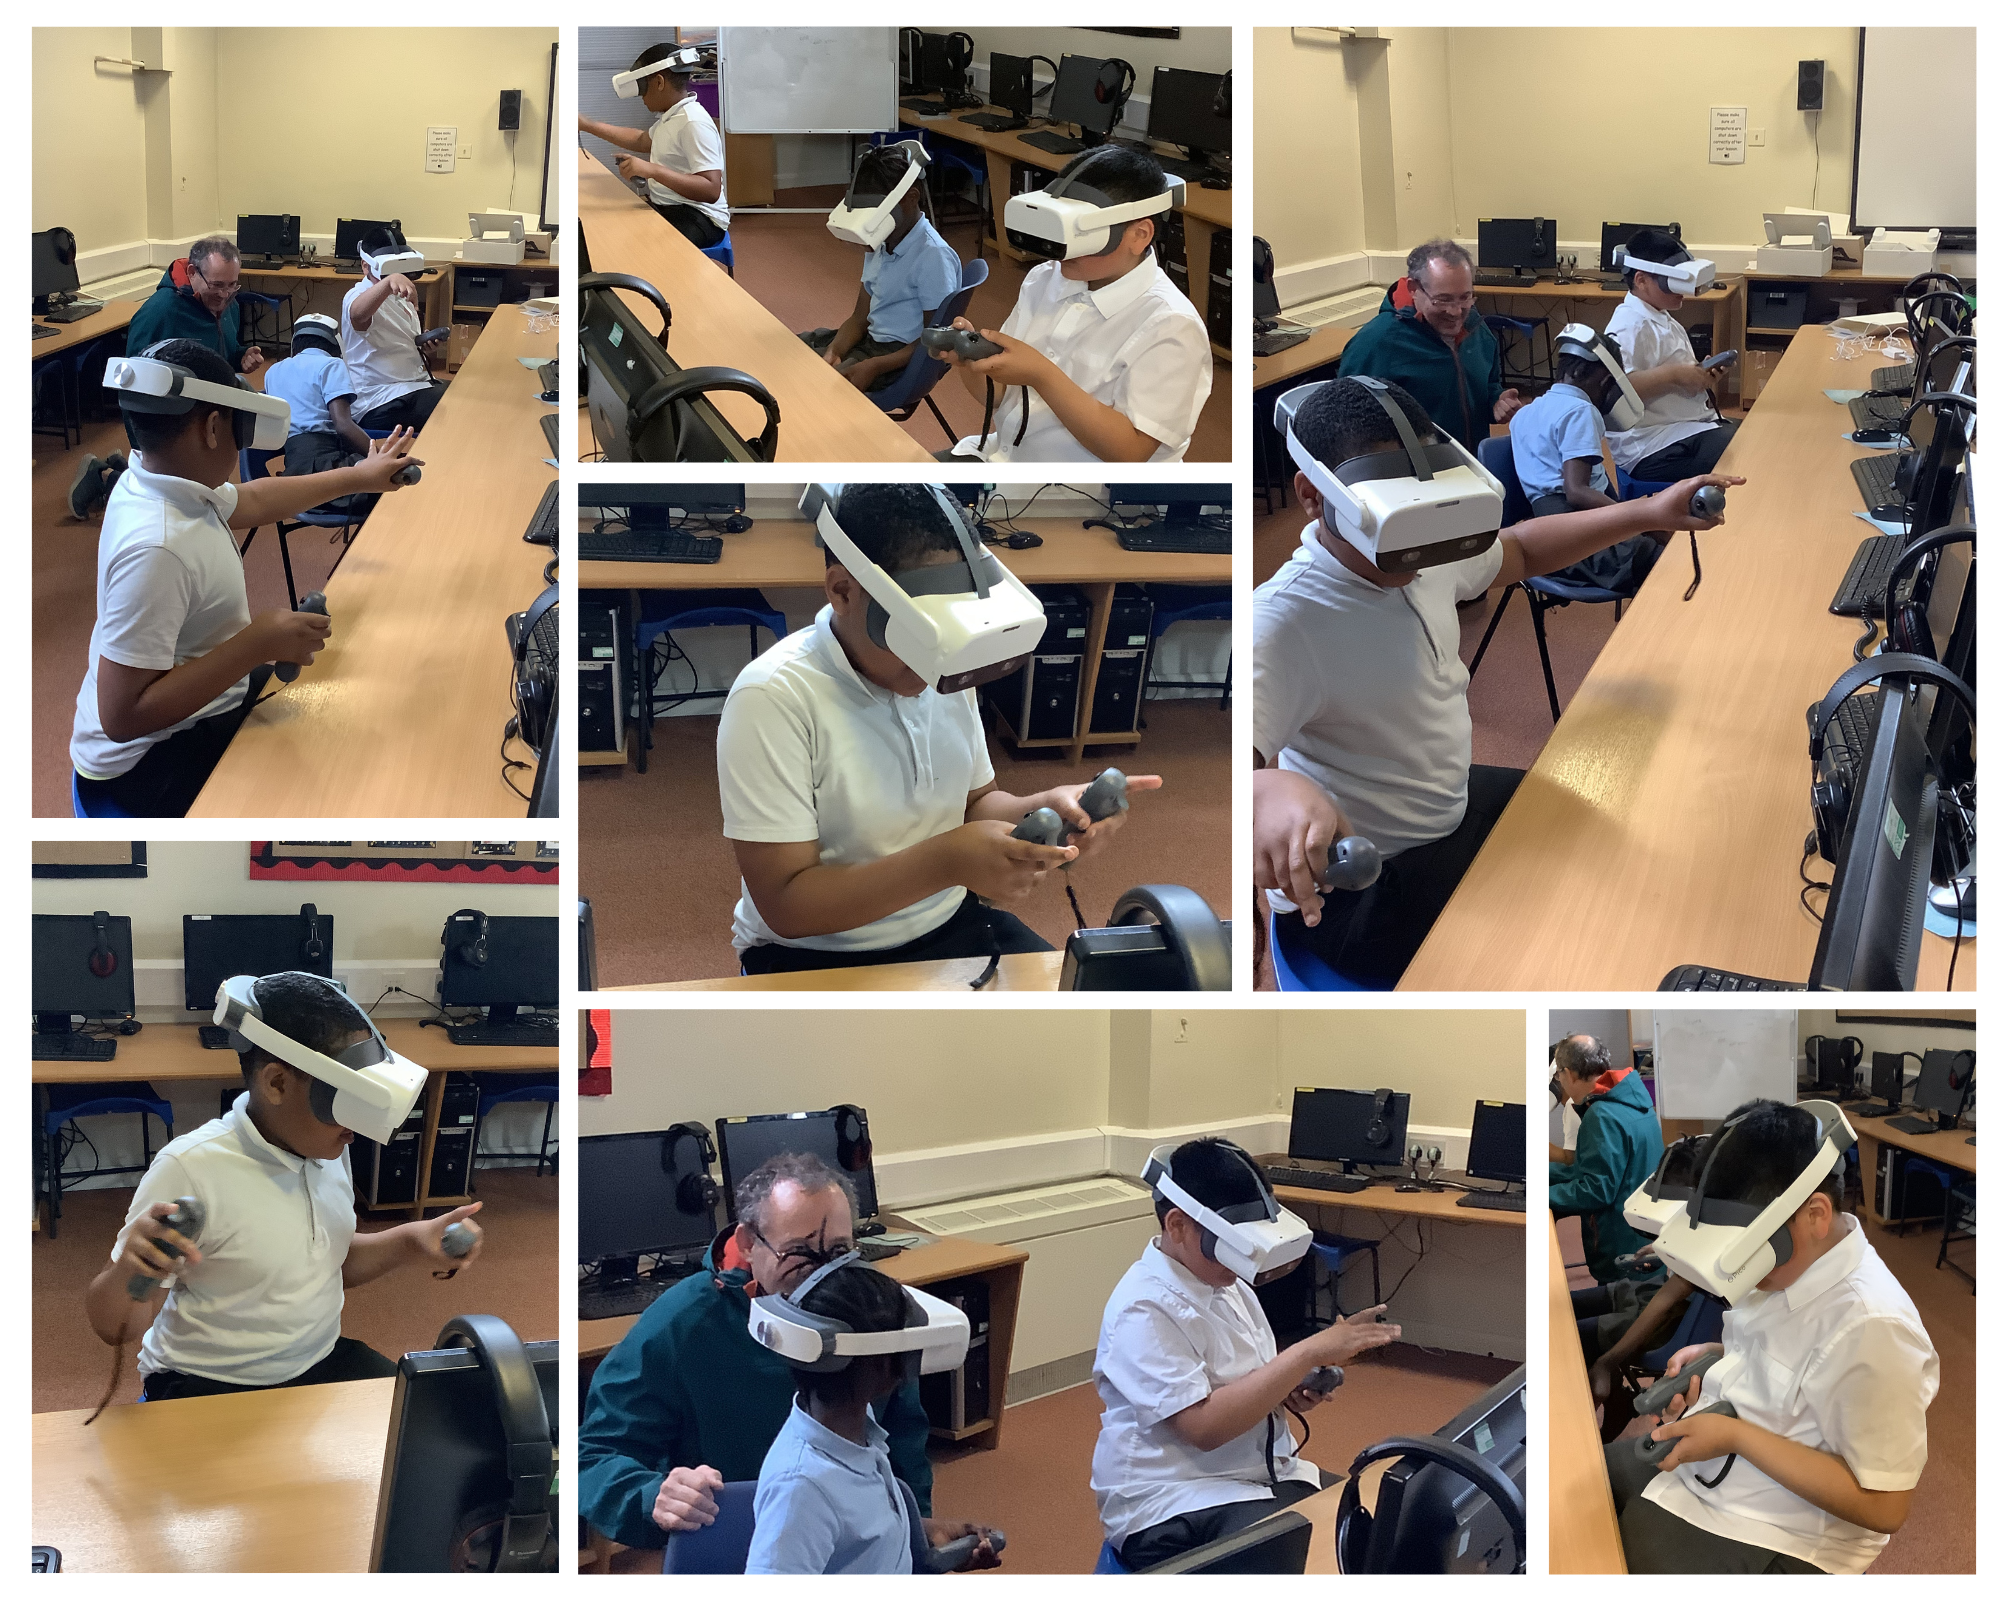 Inspiring young minds with our VR headset donations